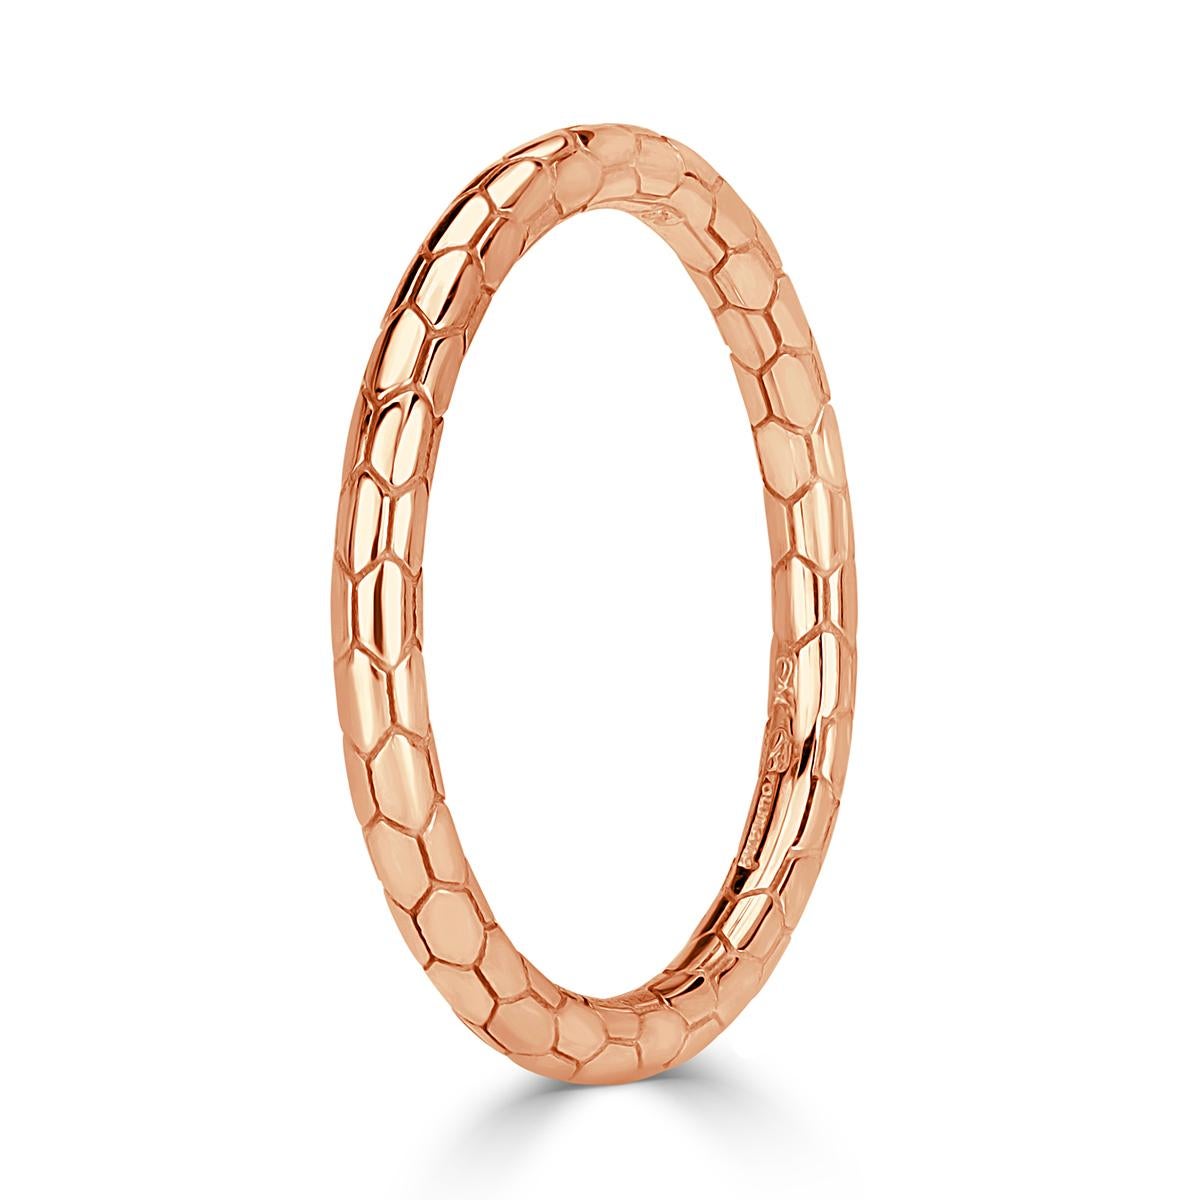 Designed in 18k rose gold, this tremendously chic and stylish wedding band features an elegant scale pattern throughout. It comes in 18k yellow, white gold and platinum as well.